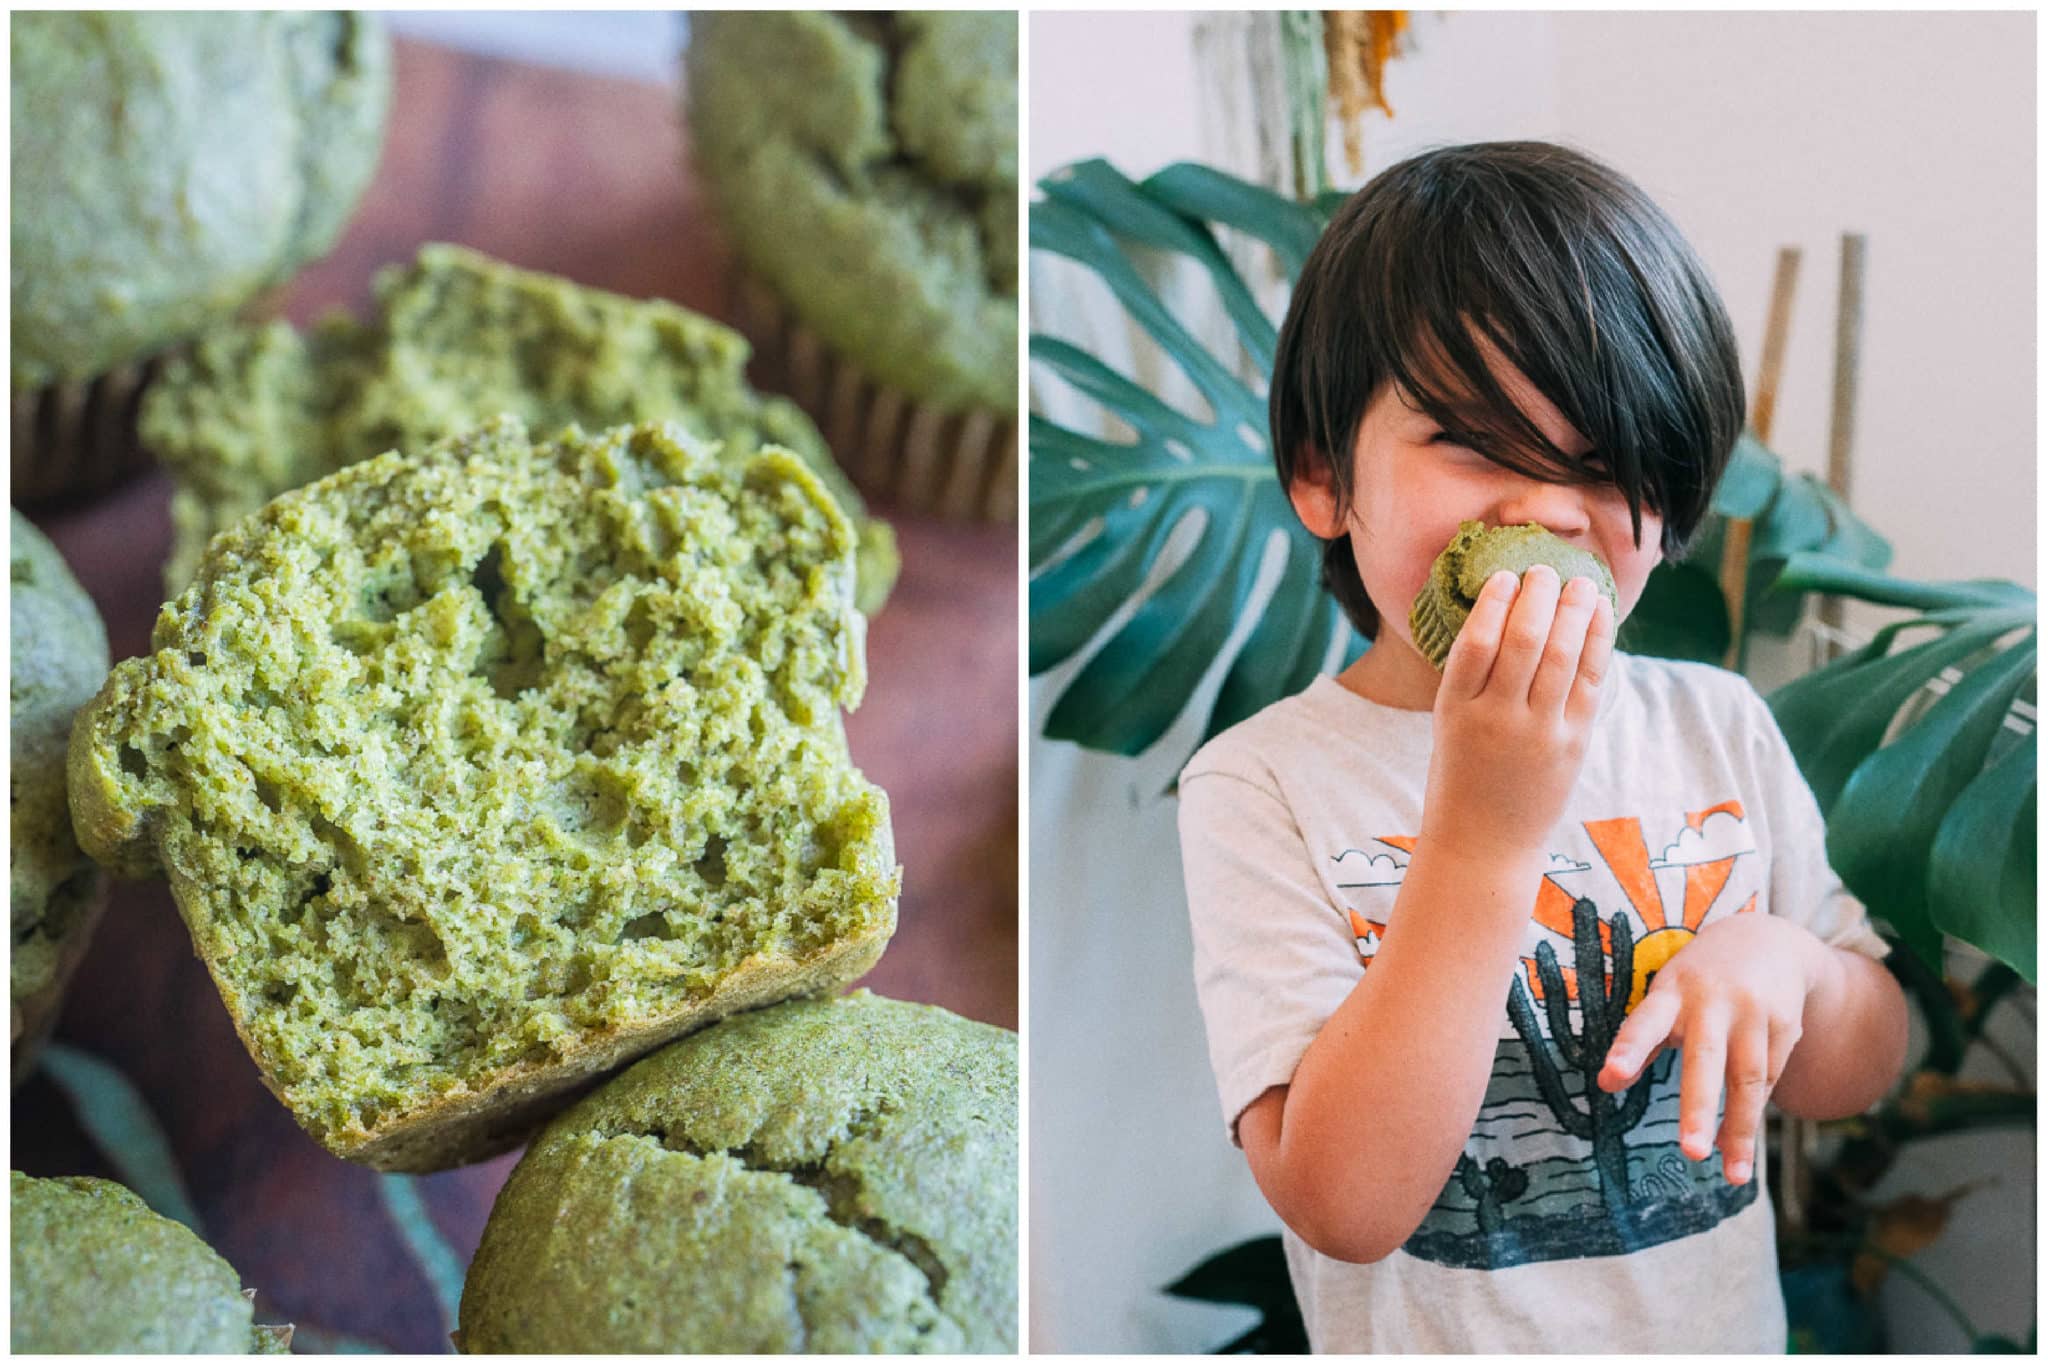 a green muffin torn in half and a child eating a mean green hulk muffin